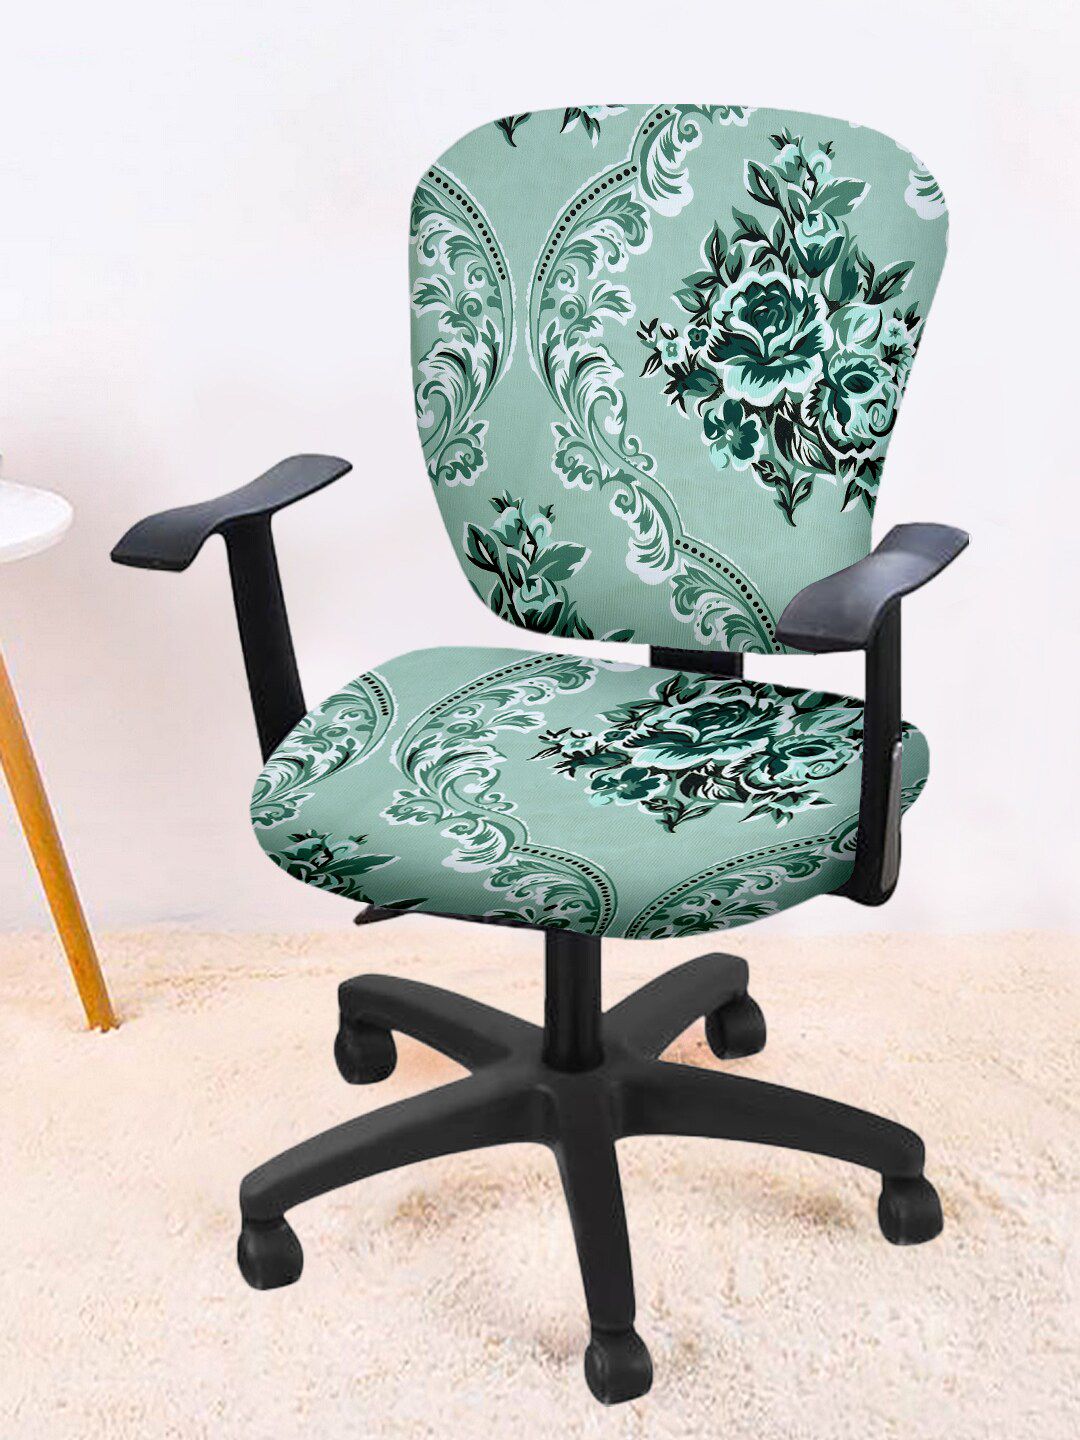 Cortina Set Of 6 Green & White Floral Print Chair Covers Price in India